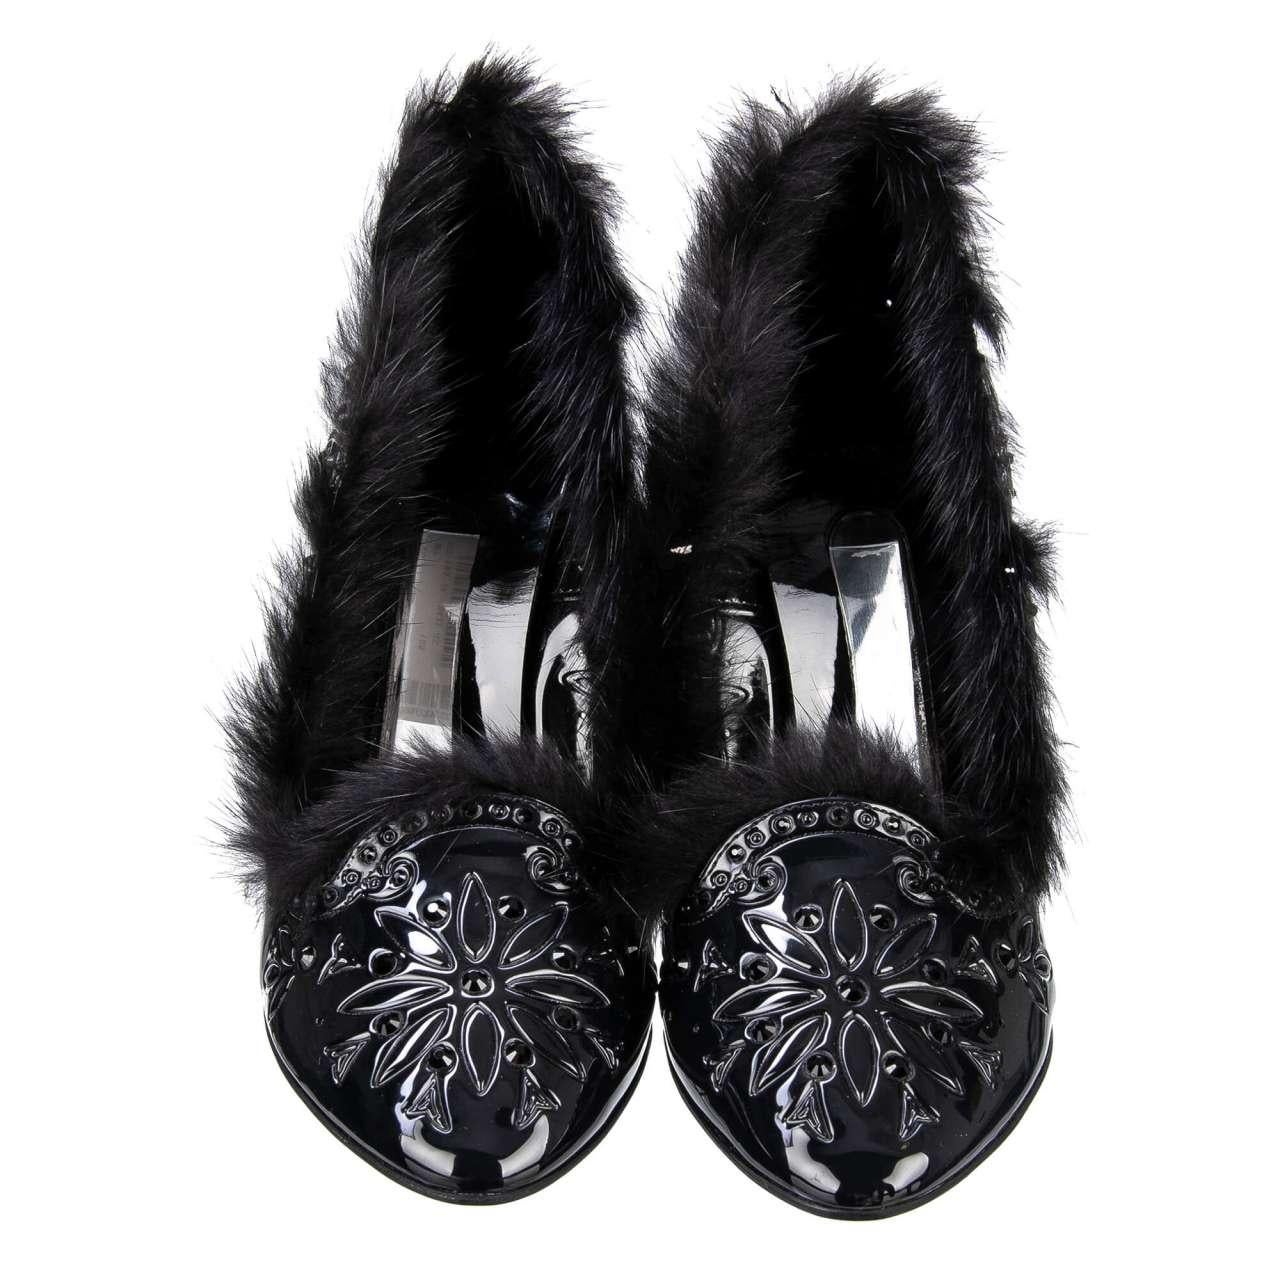 Dolce & Gabbana - Cinderella Fur and PVC Pumps with Crystals Black 37 In Excellent Condition For Sale In Erkrath, DE